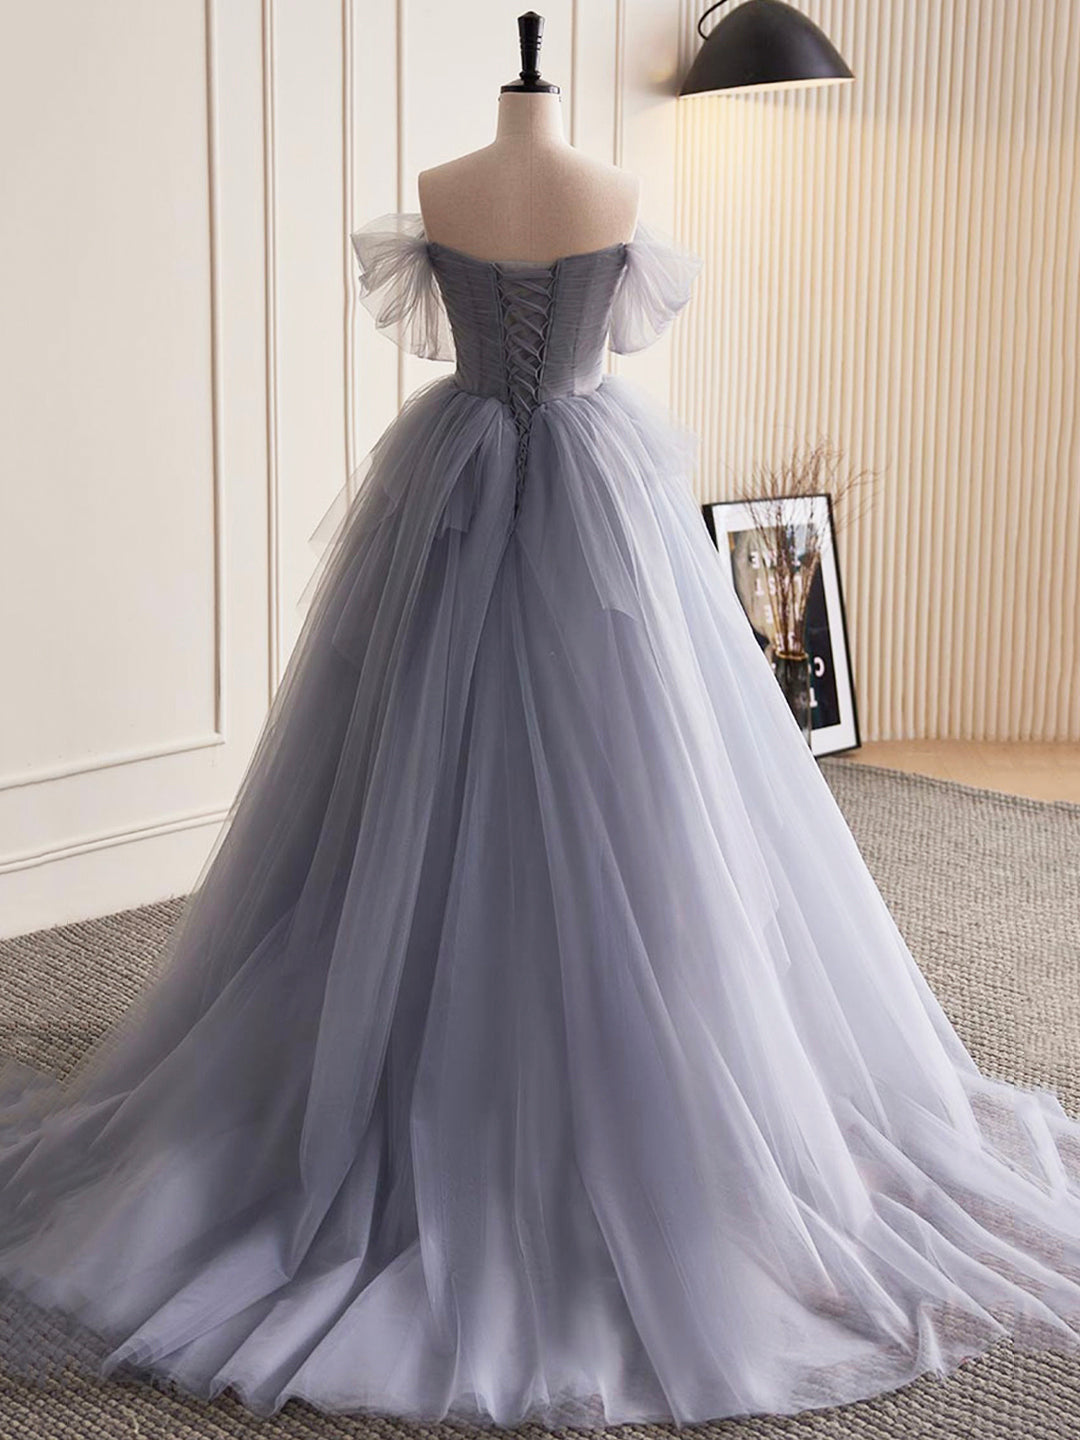 Bridesmaid Dresses Green, Gray Tulle Long A-Line Prom Dress, Off Shoulder Evening Dress Party Dress